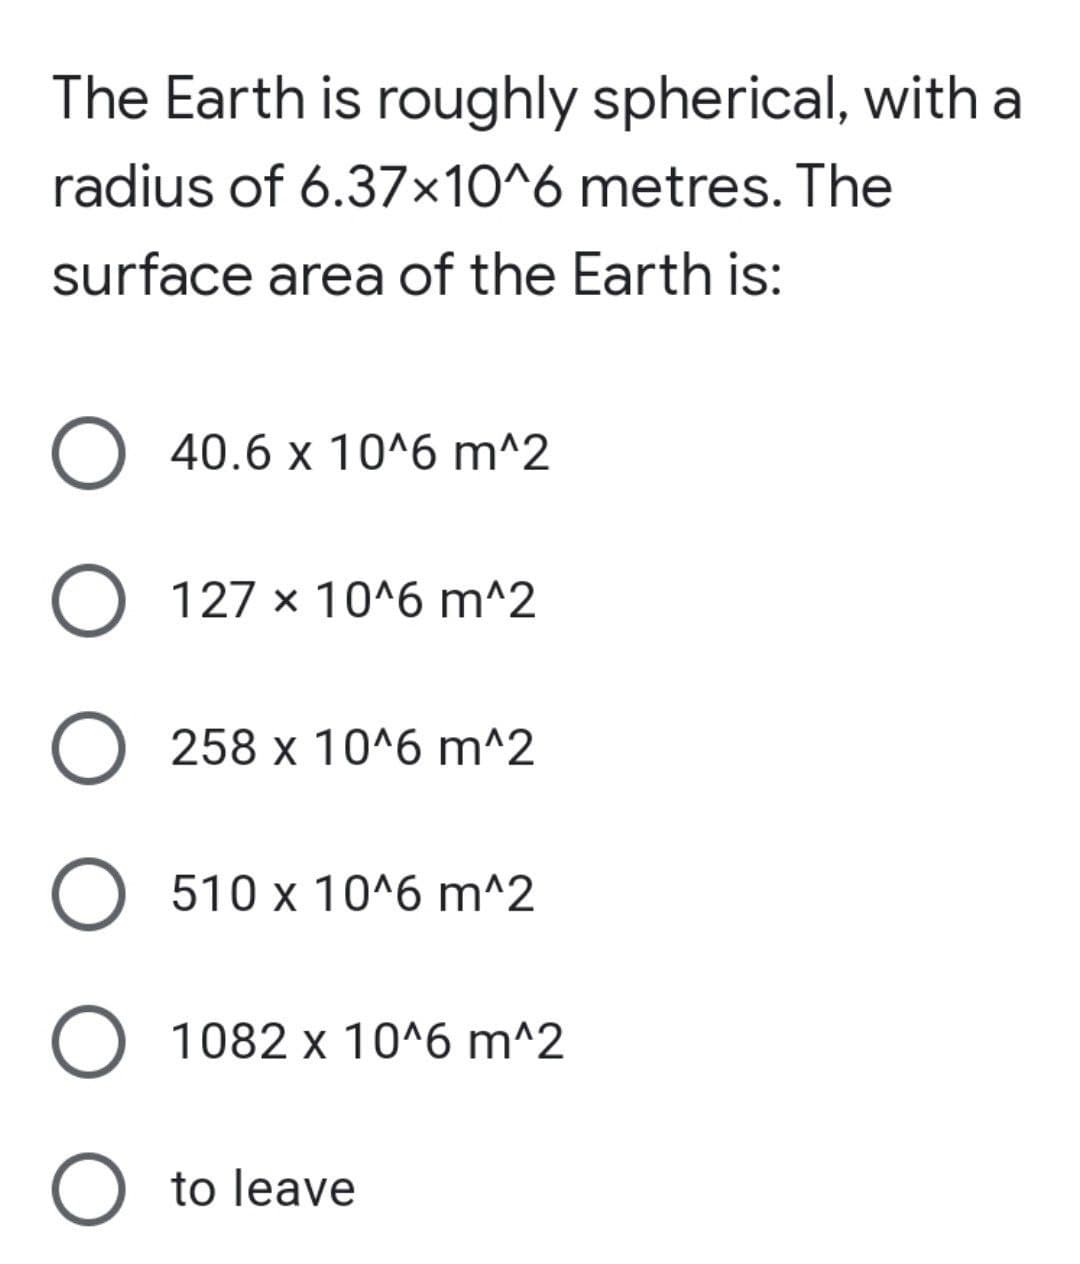 The Earth is roughly spherical, with a
radius of 6.37x10^6 metres. The
surface area of the Earth is:
O 40.6 x 10^6 m^2
O 127 x 10^6 m^2
O 258 x 10^6 m^2
O 510 x 10^6 m^2
O 1082 x 10^6 m^2
O to leave